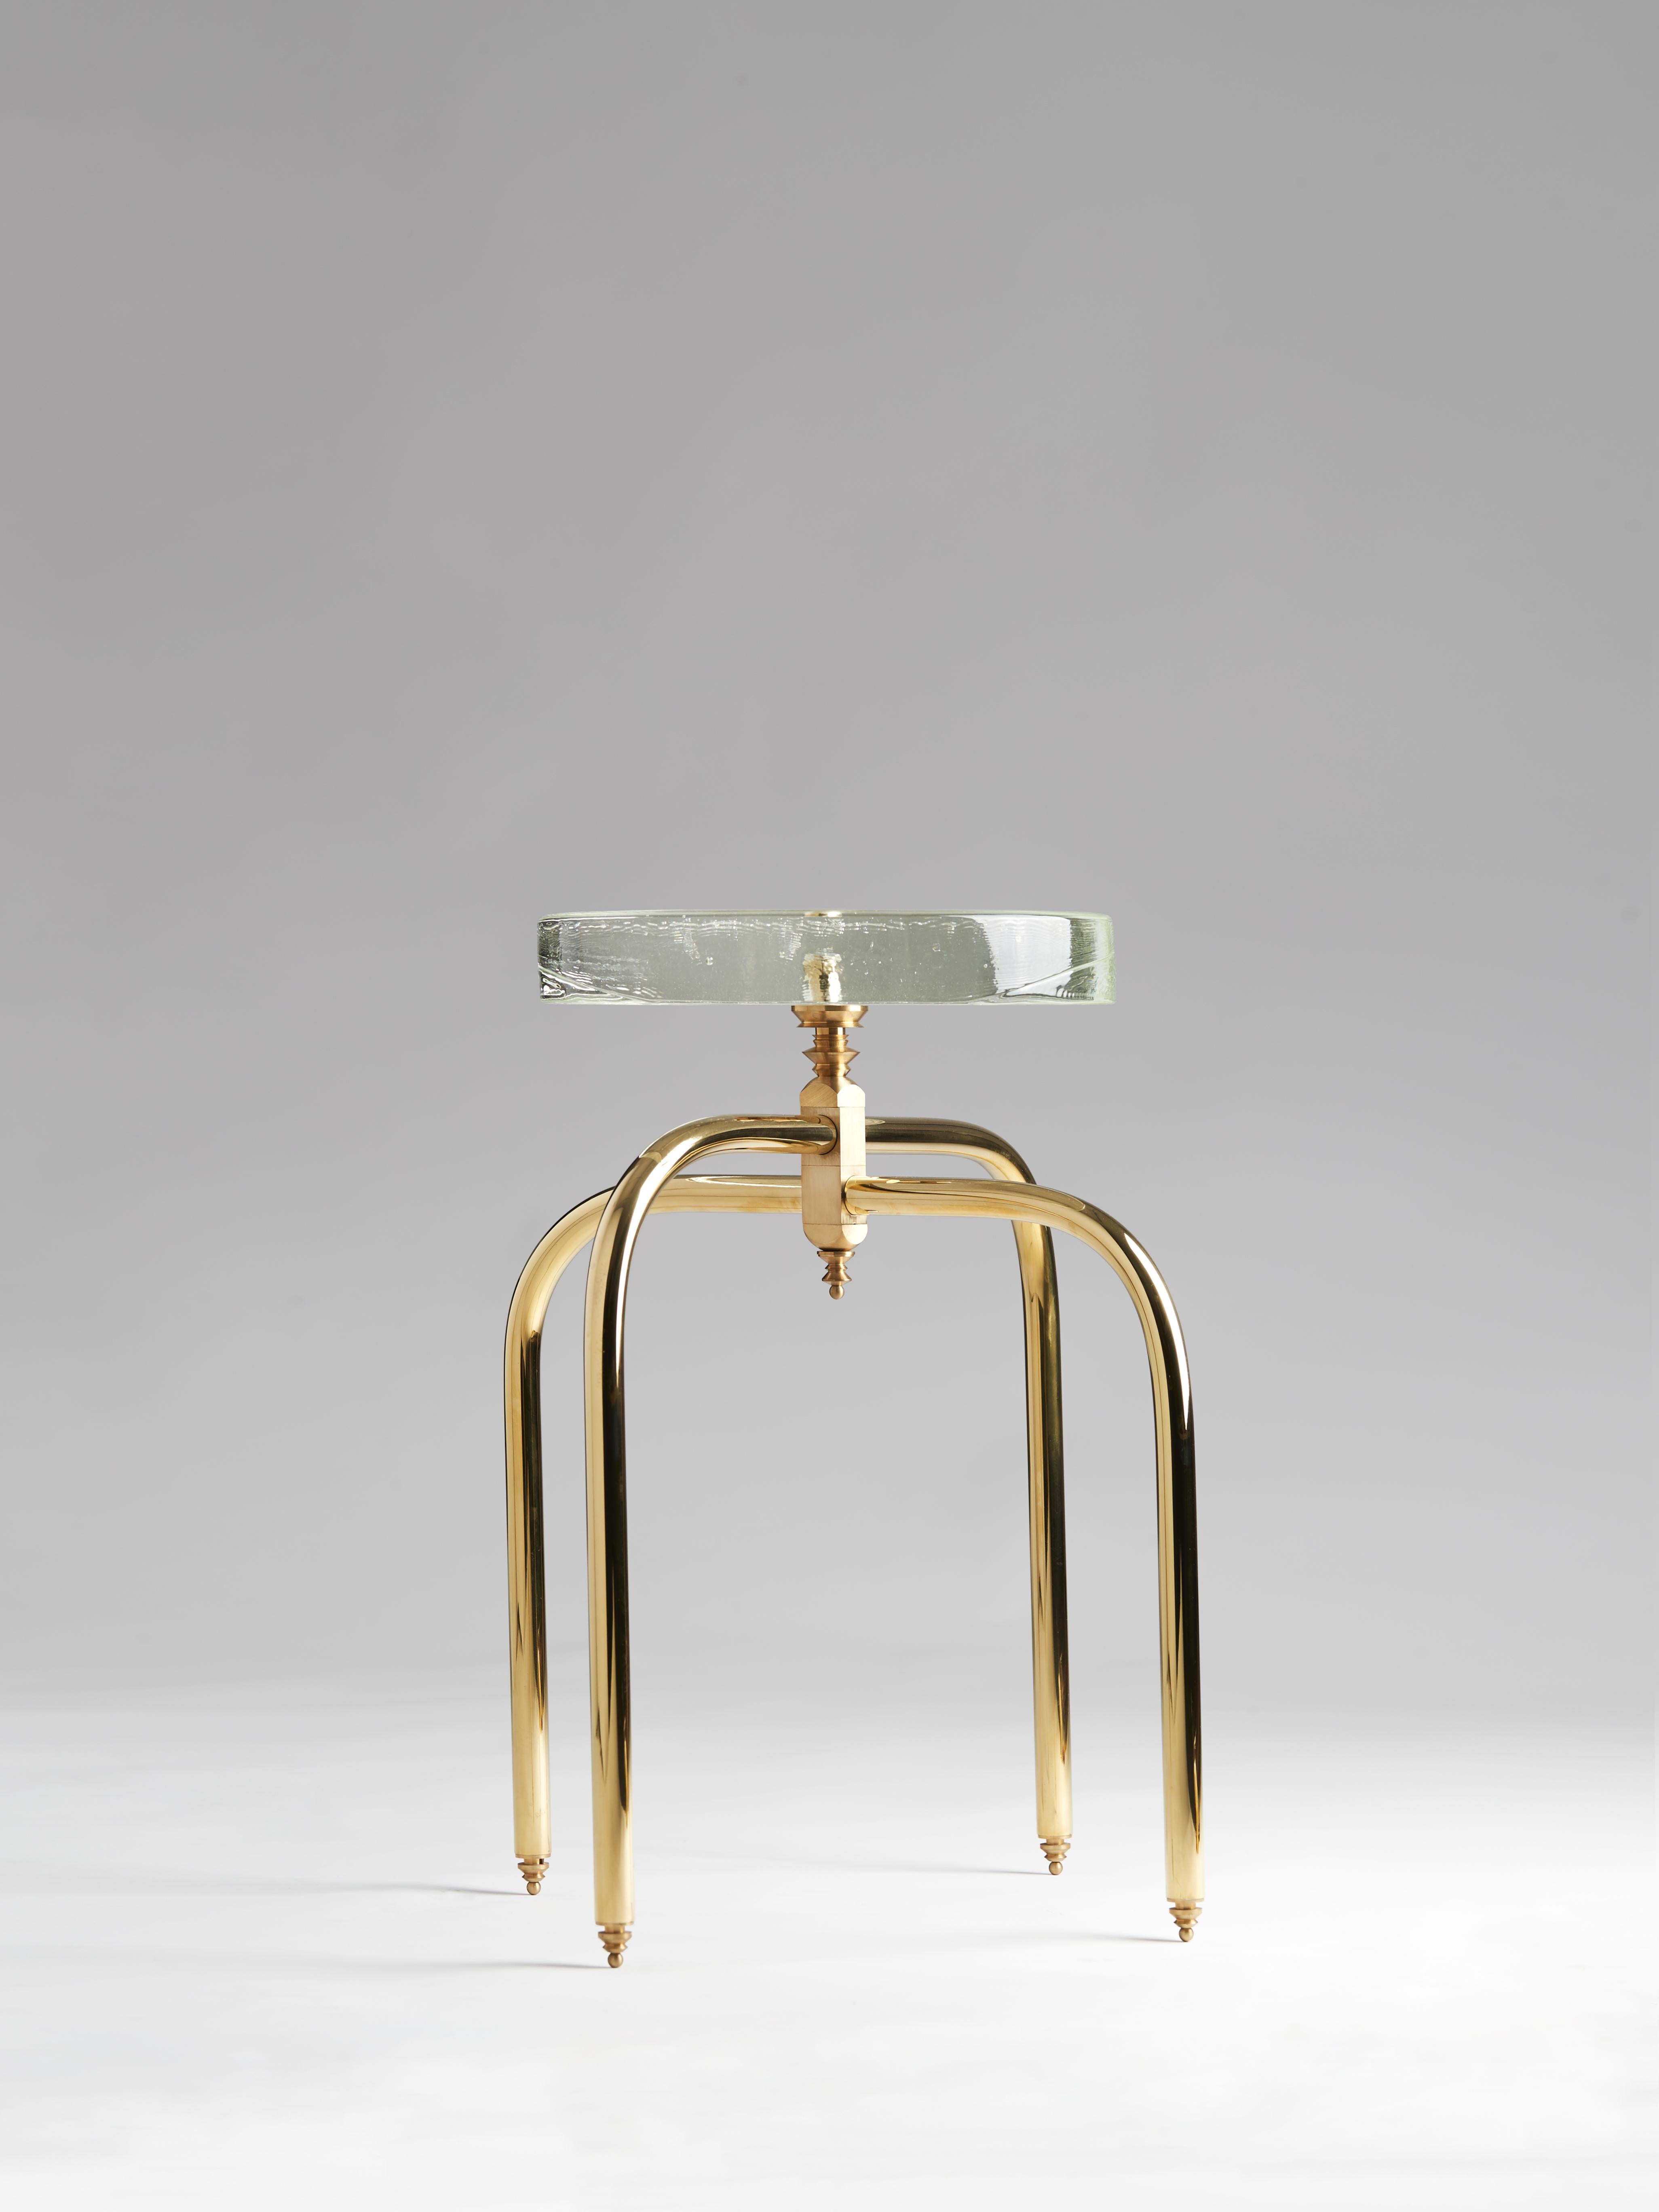 Dorique stool by Mydriaz
Dimensions: w 40 x d 40 x h 55 cm
Materials: Brass, glass

Made to order creations are possible, please contact us.

Our products are handmade in our workshop. Dimensions and finishes may vary slightly from one model